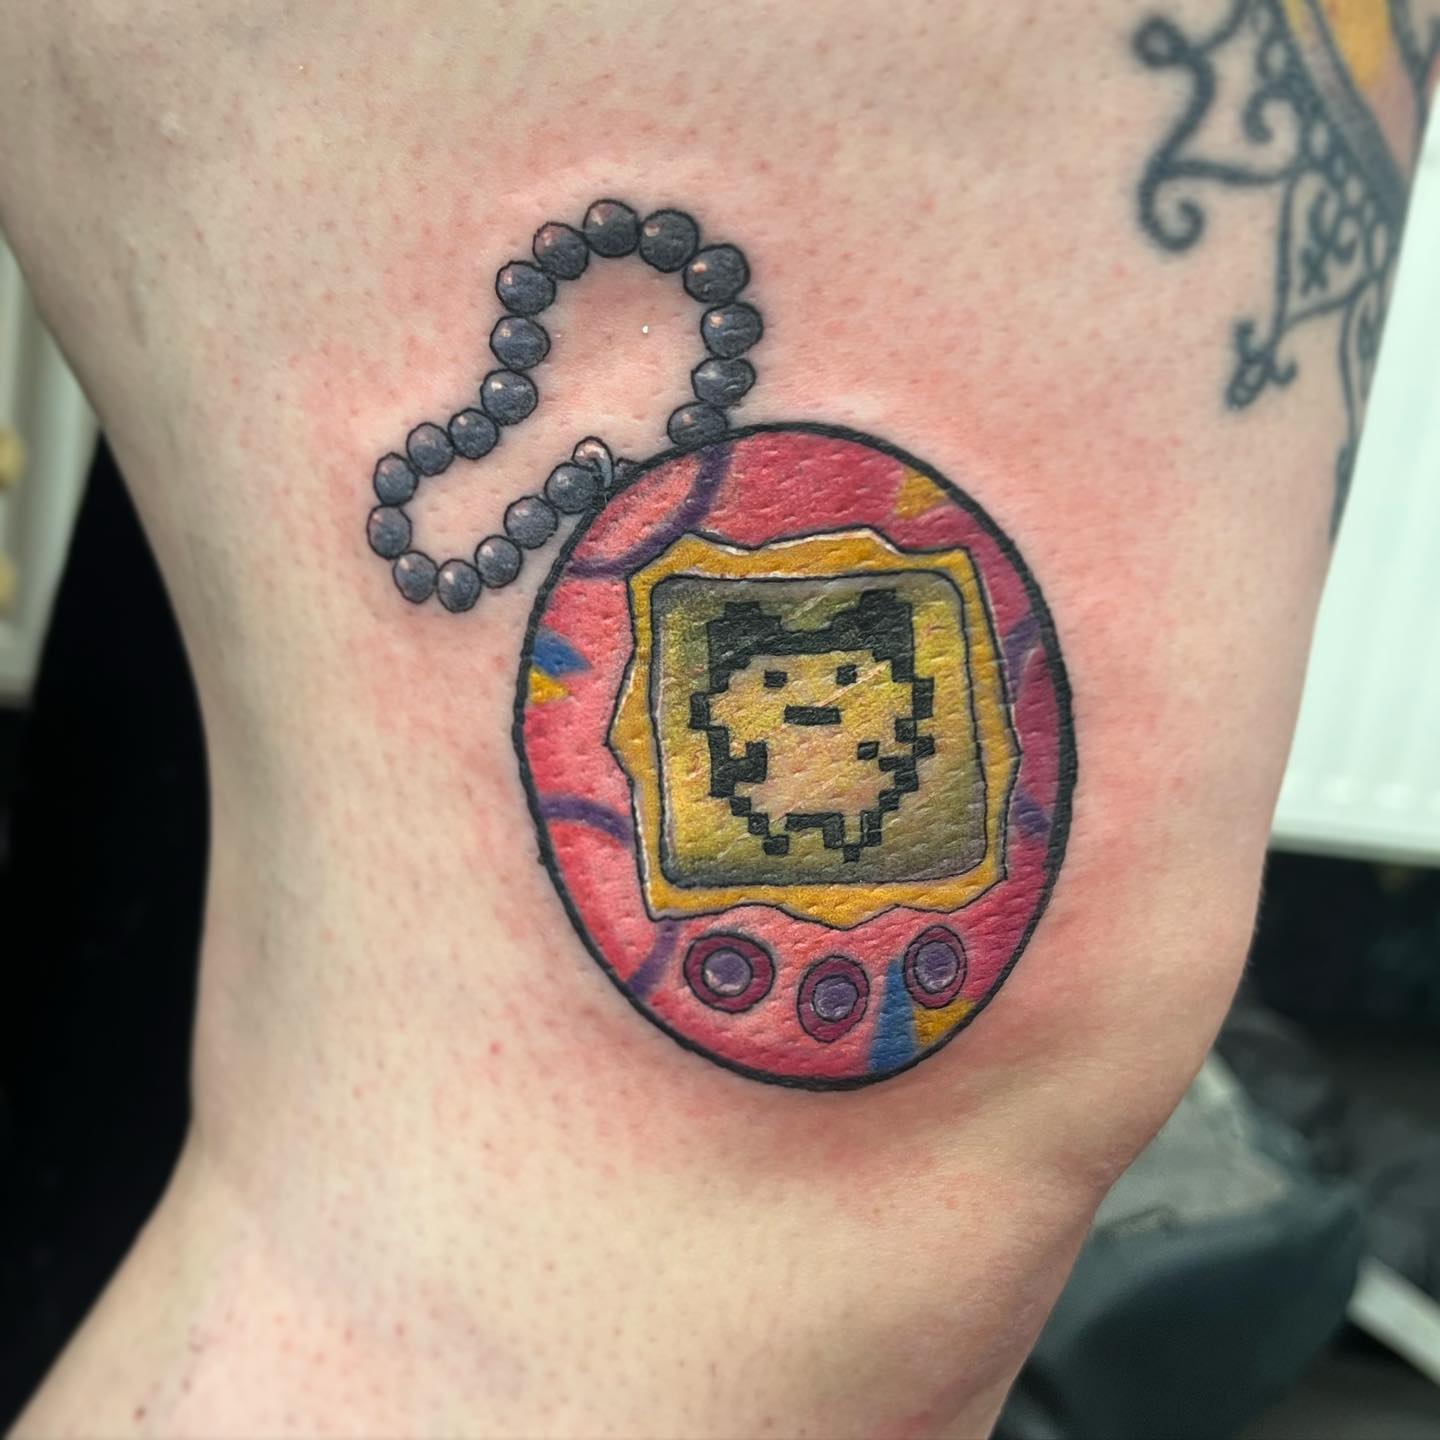 Tamagotchi for the super tough Chloe, getting all the tattoos this week. This is one of 10 we did over a couple sessions. 

Hope they are all settling in nice and easy! 

                